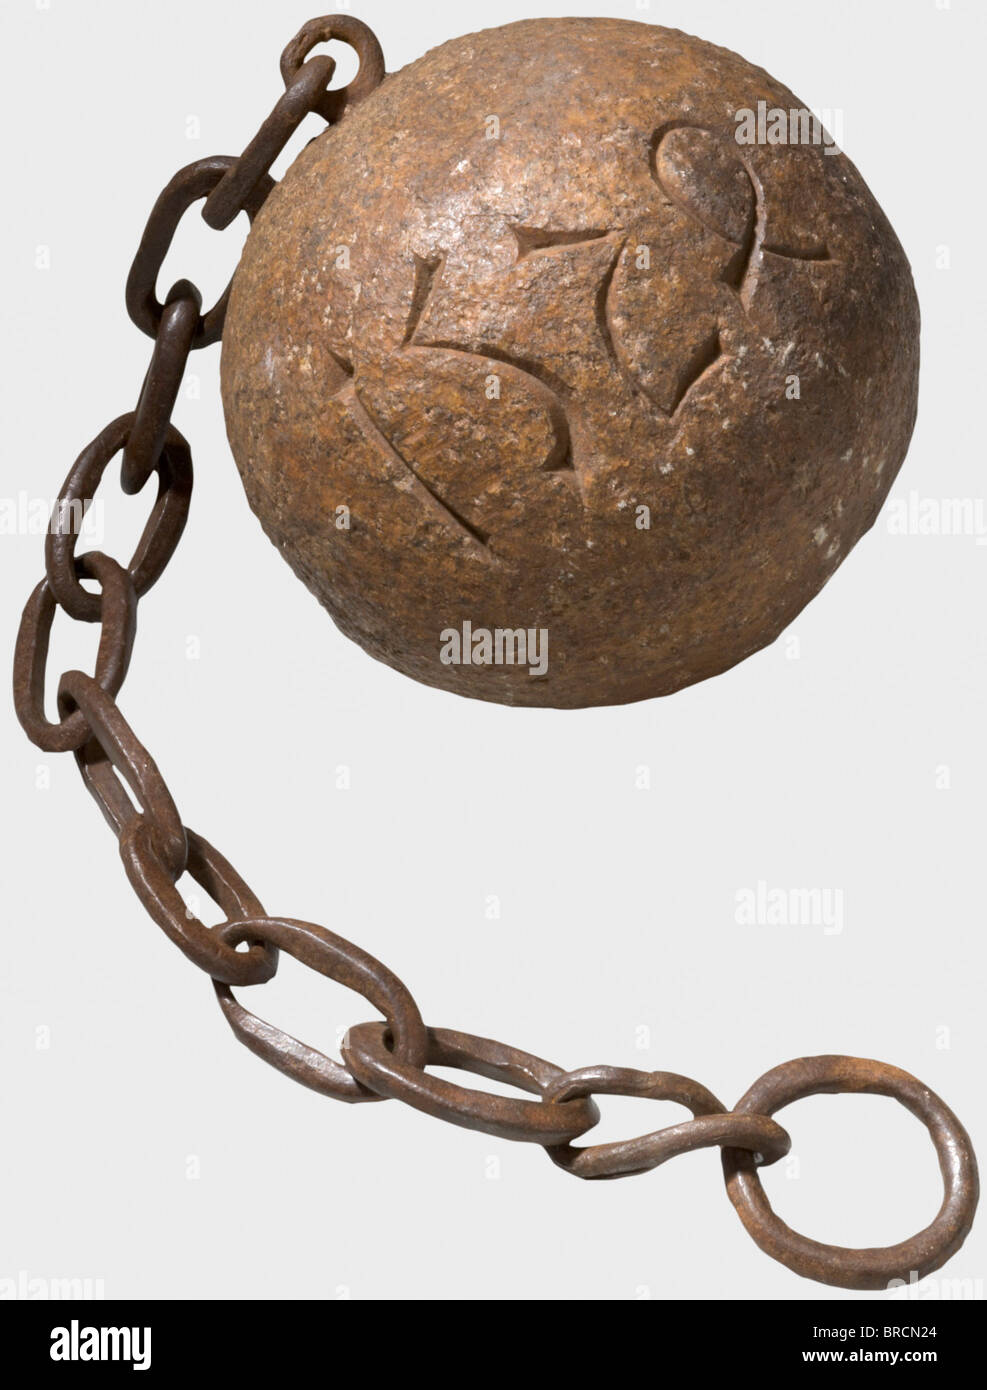 Chain Ball Attached To Man Stock Illustrations – 16 Chain Ball